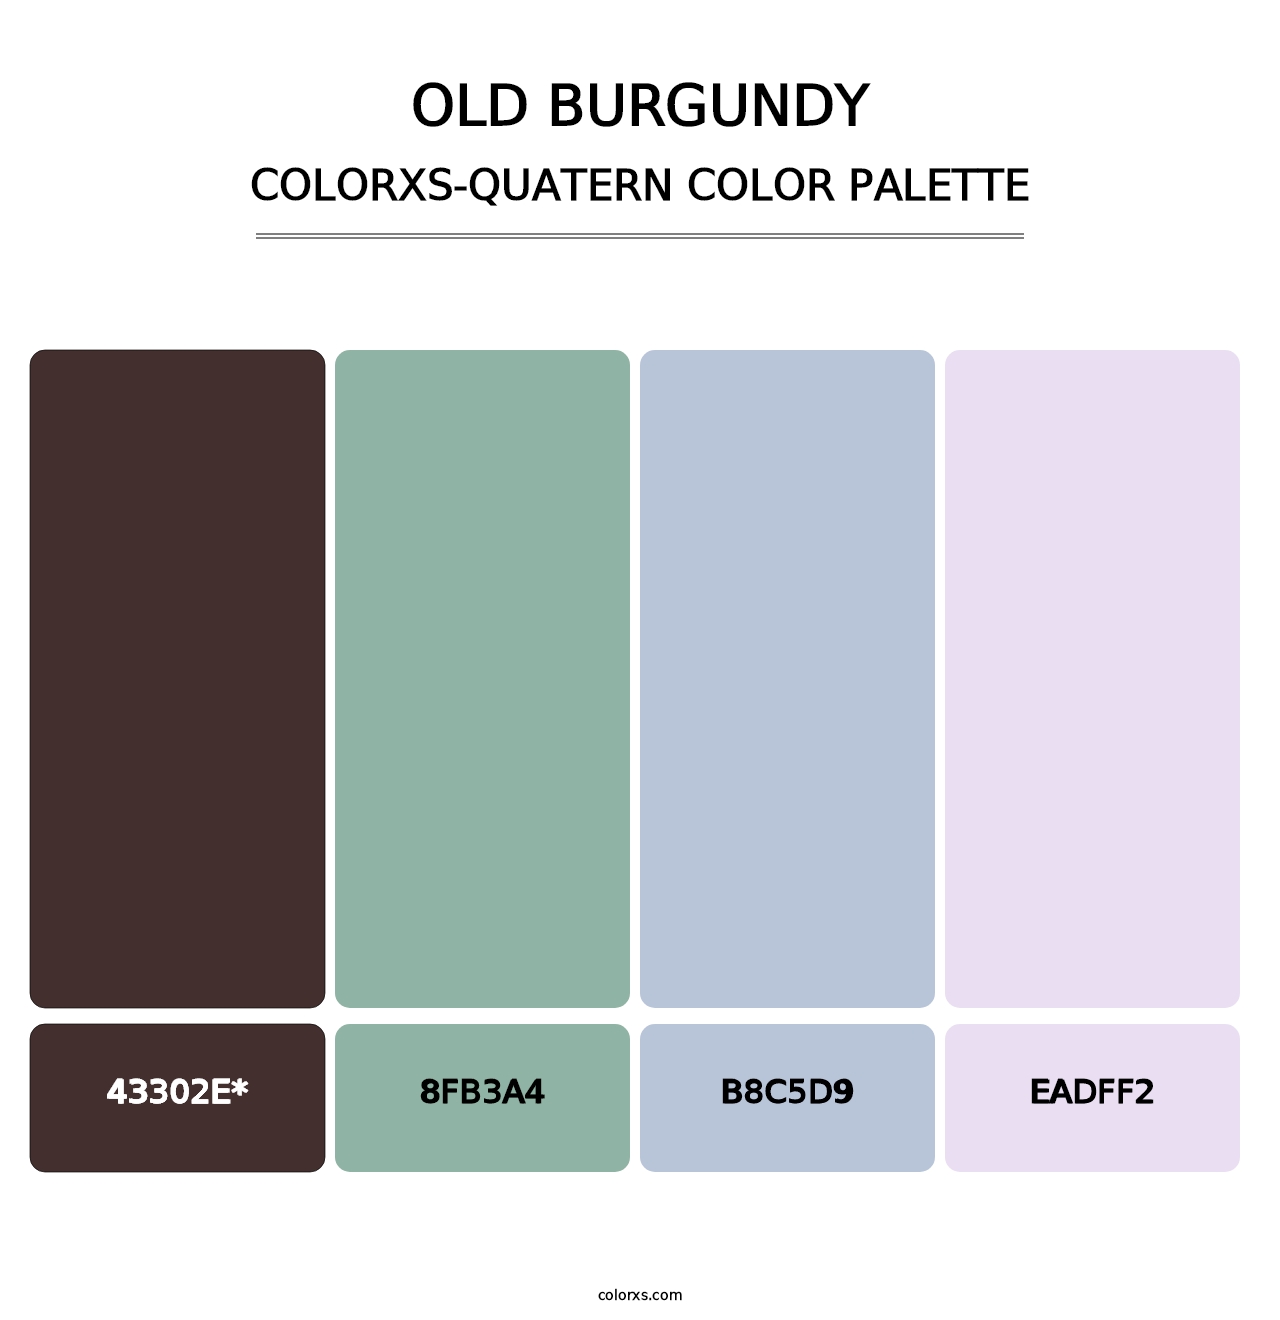 Old Burgundy - Colorxs Quatern Palette